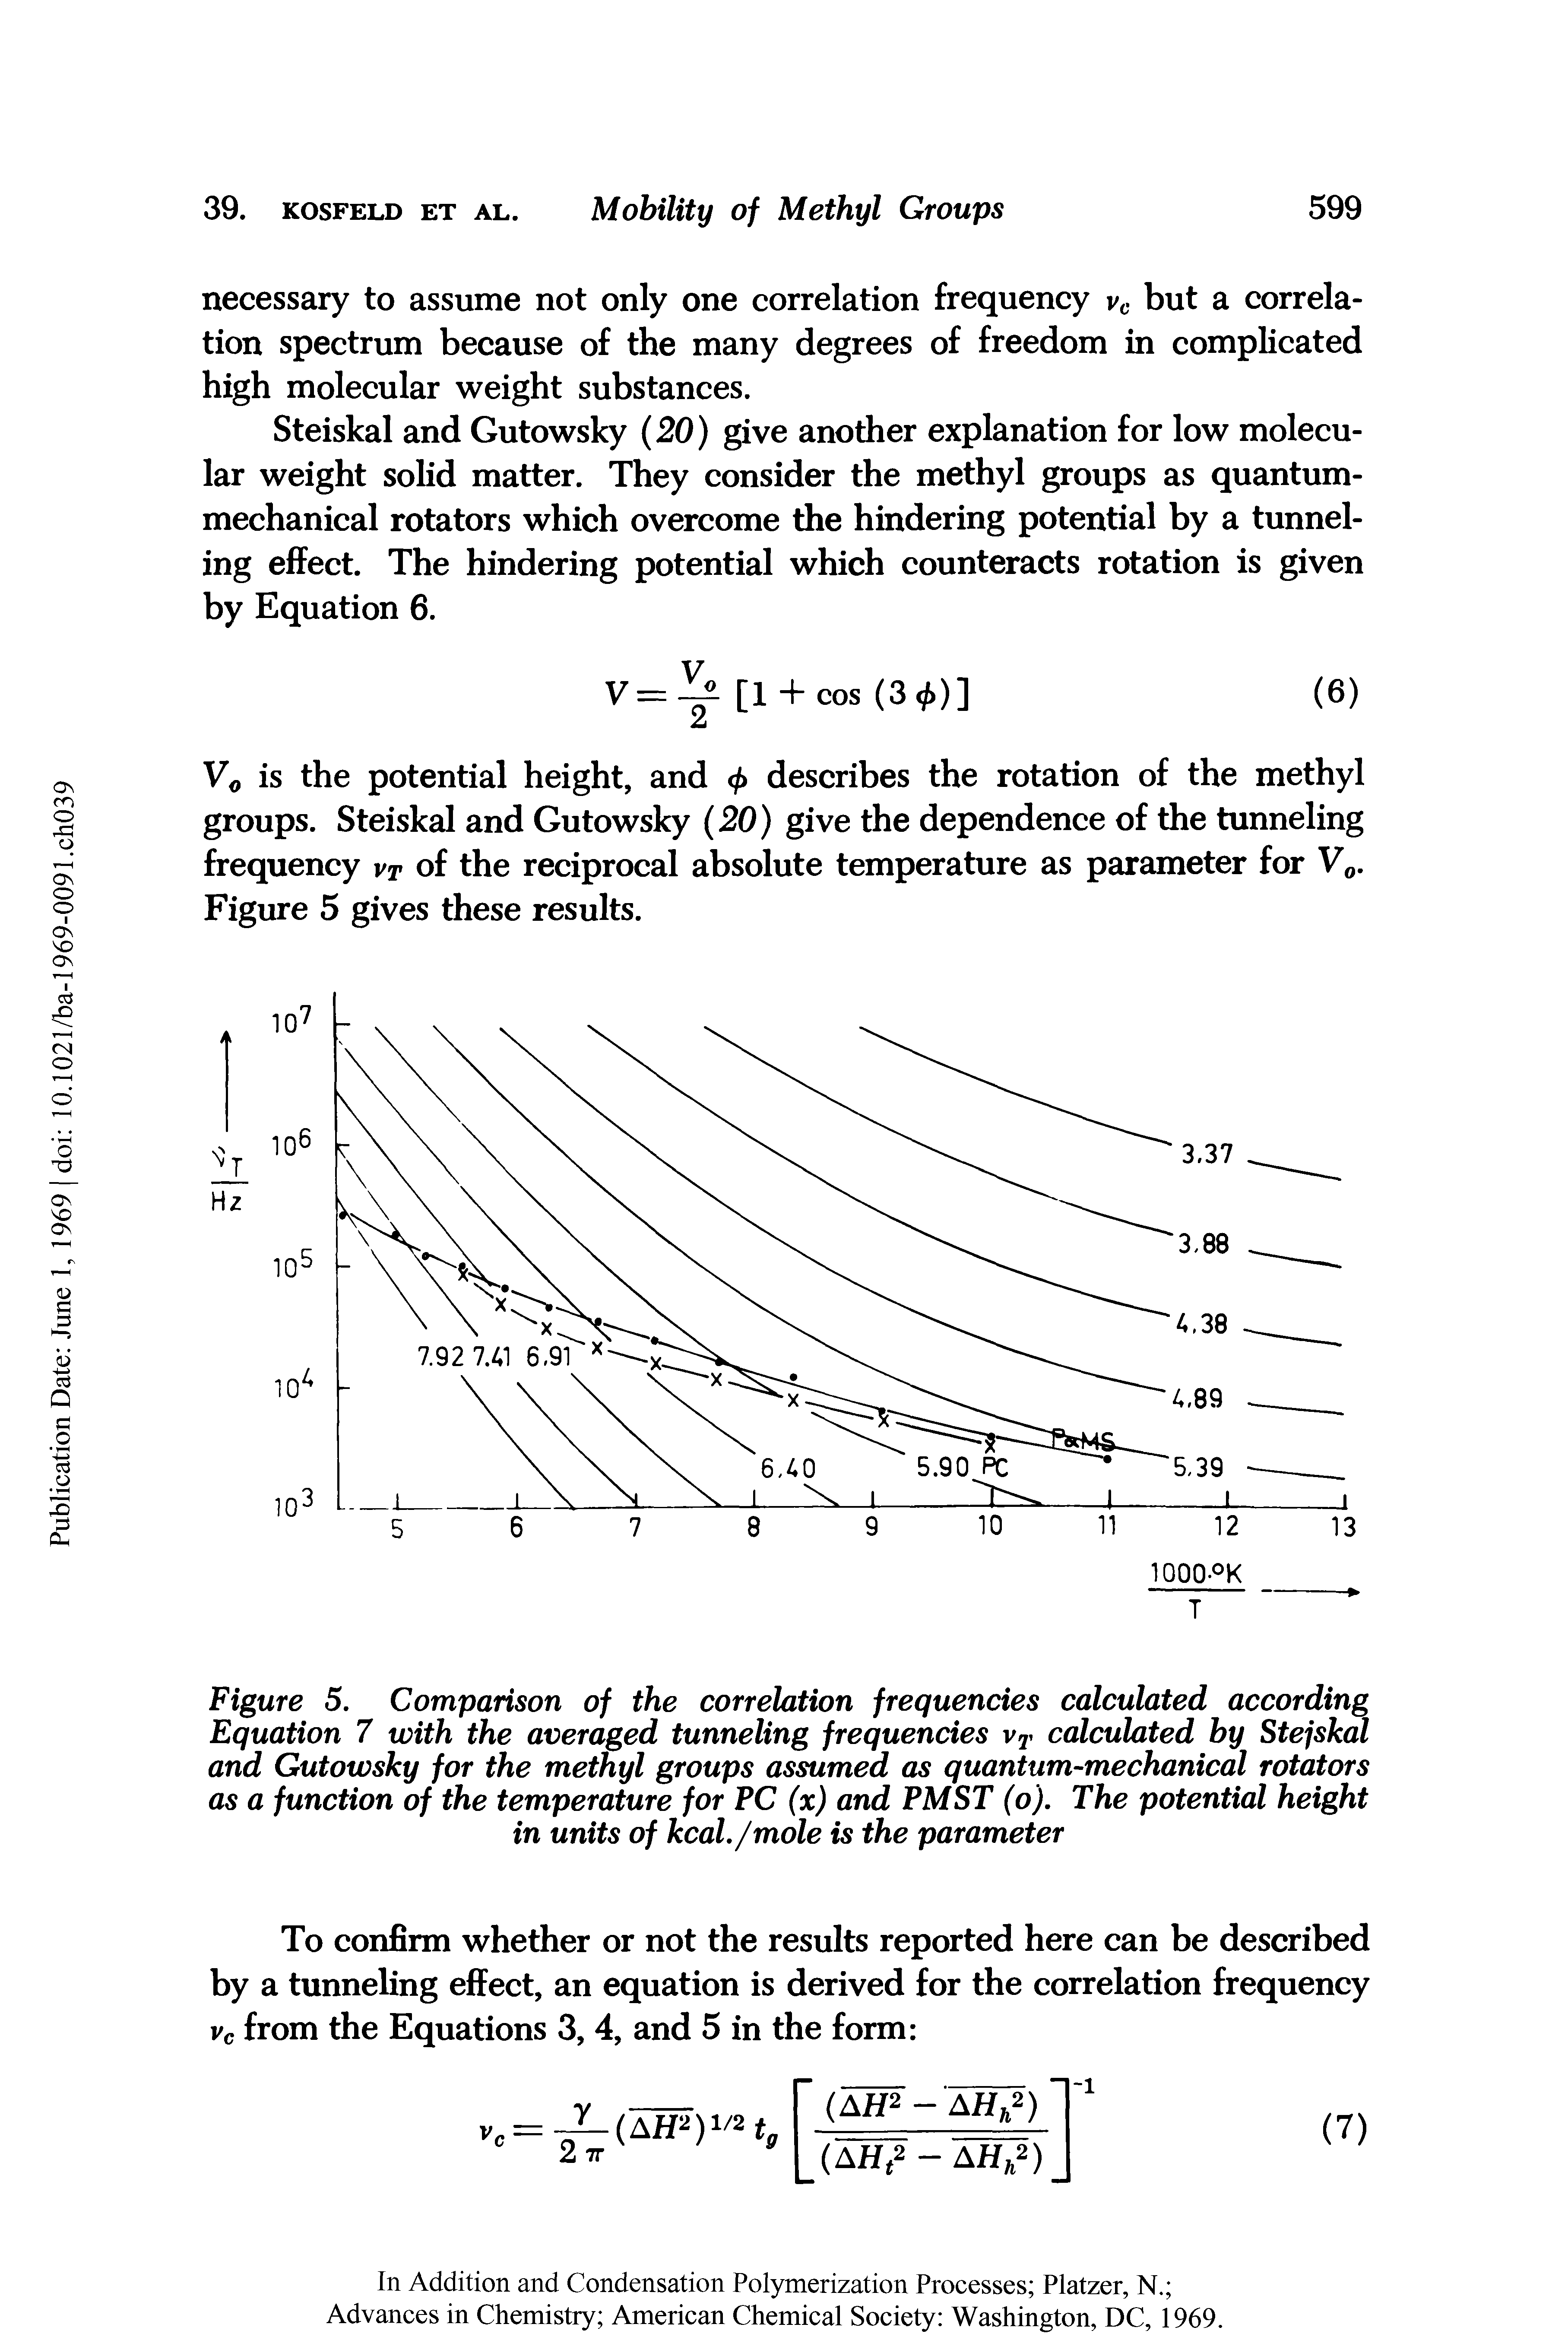 Figure 5. Comparison of the correlation frequencies calculated according Equation 1 with the averaged tunneling frequencies vr calculated by Stejskal and Gutowsky for the methyl groups assumed as quantum-mechanical rotators as a function of the temperature for PC (x) and PMST (o). The potential height in units of kcal./mole is the parameter...